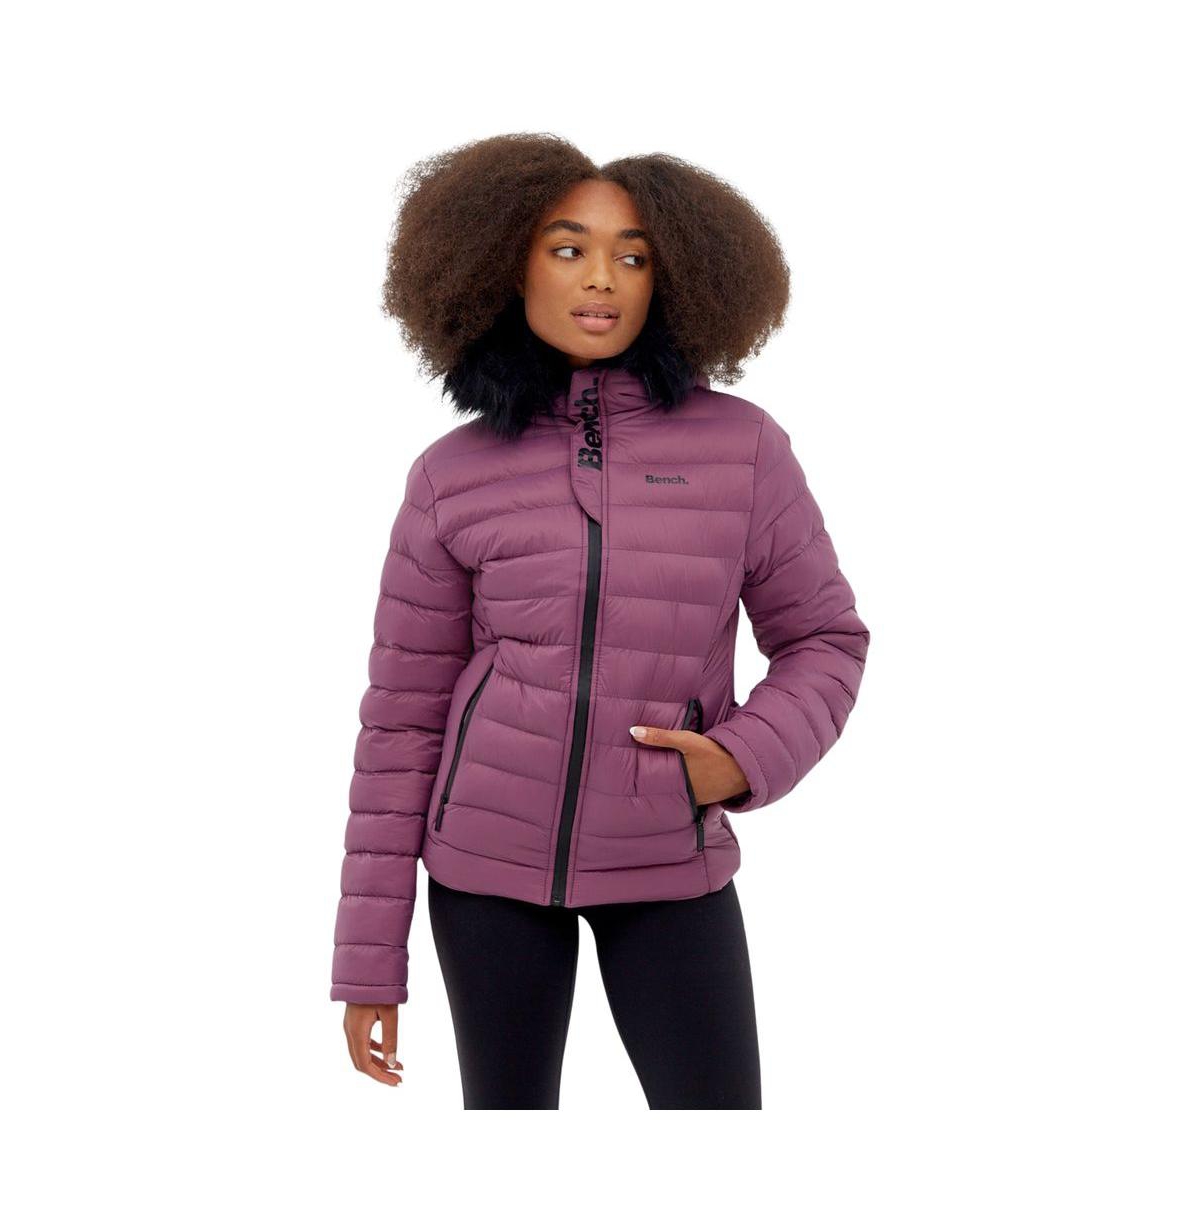 Ludlow Hooded Puffer Jacket - Arctic